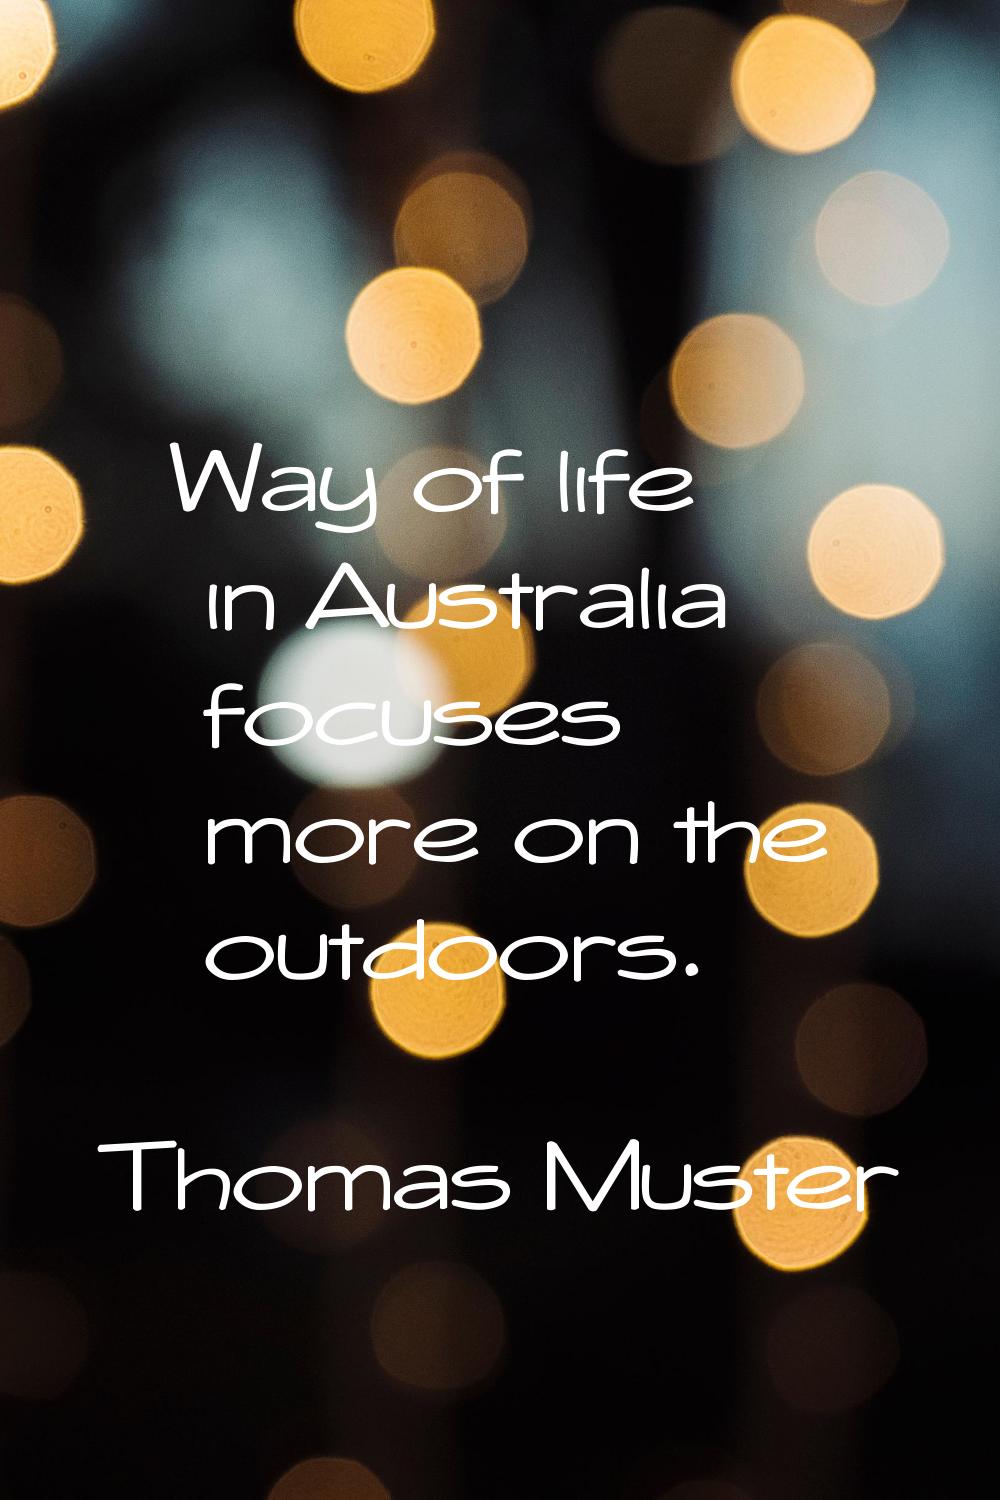 Way of life in Australia focuses more on the outdoors.